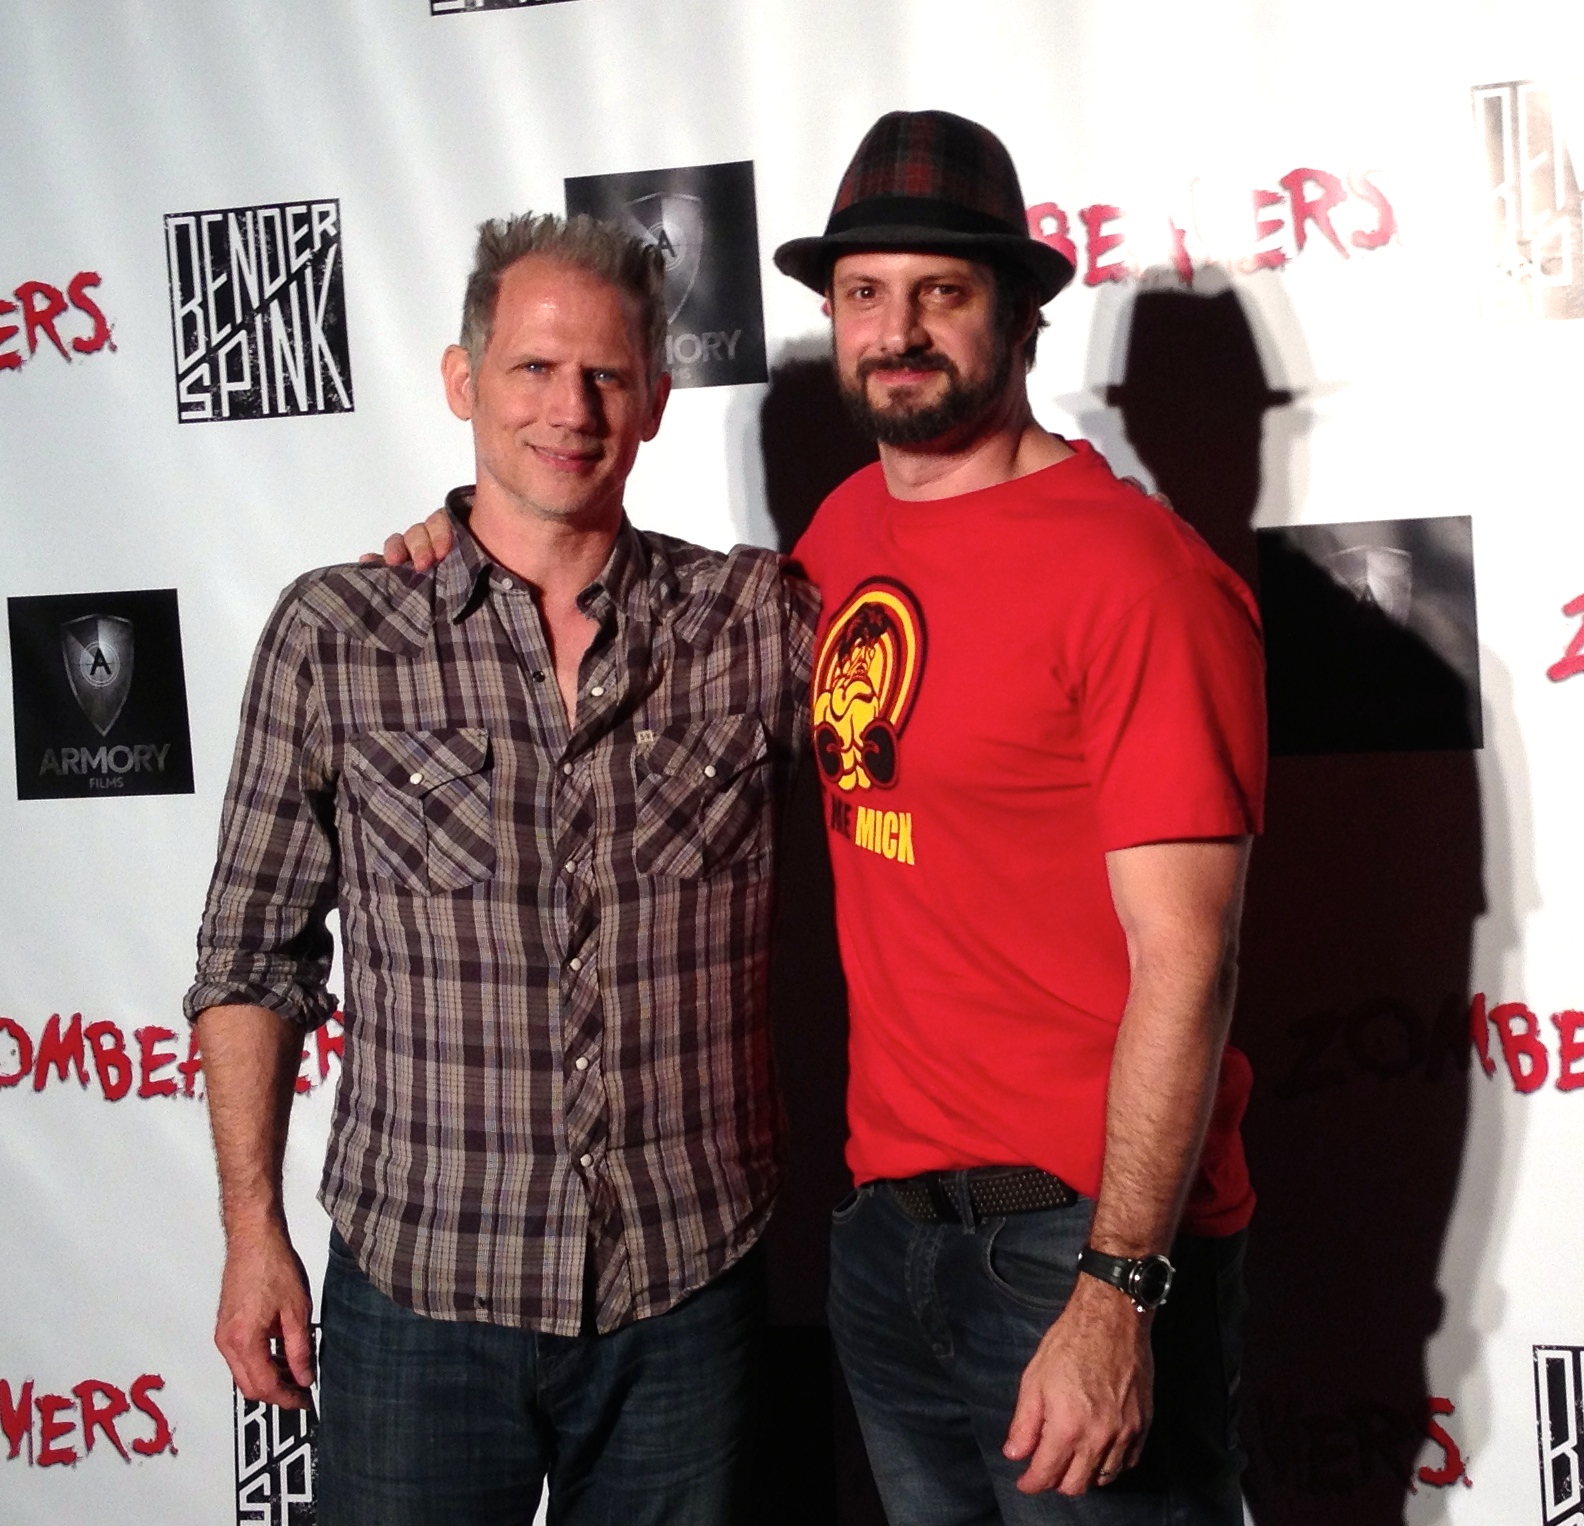 LOS ANGELES, CA - MARCH 18: Distributor Mike Simon and Actor/Director David Rountree attend 'Zombeavers' - Los Angeles Premiere at The Theater at The Ace Hotel on March 18, 2015 in Los Angeles, California.